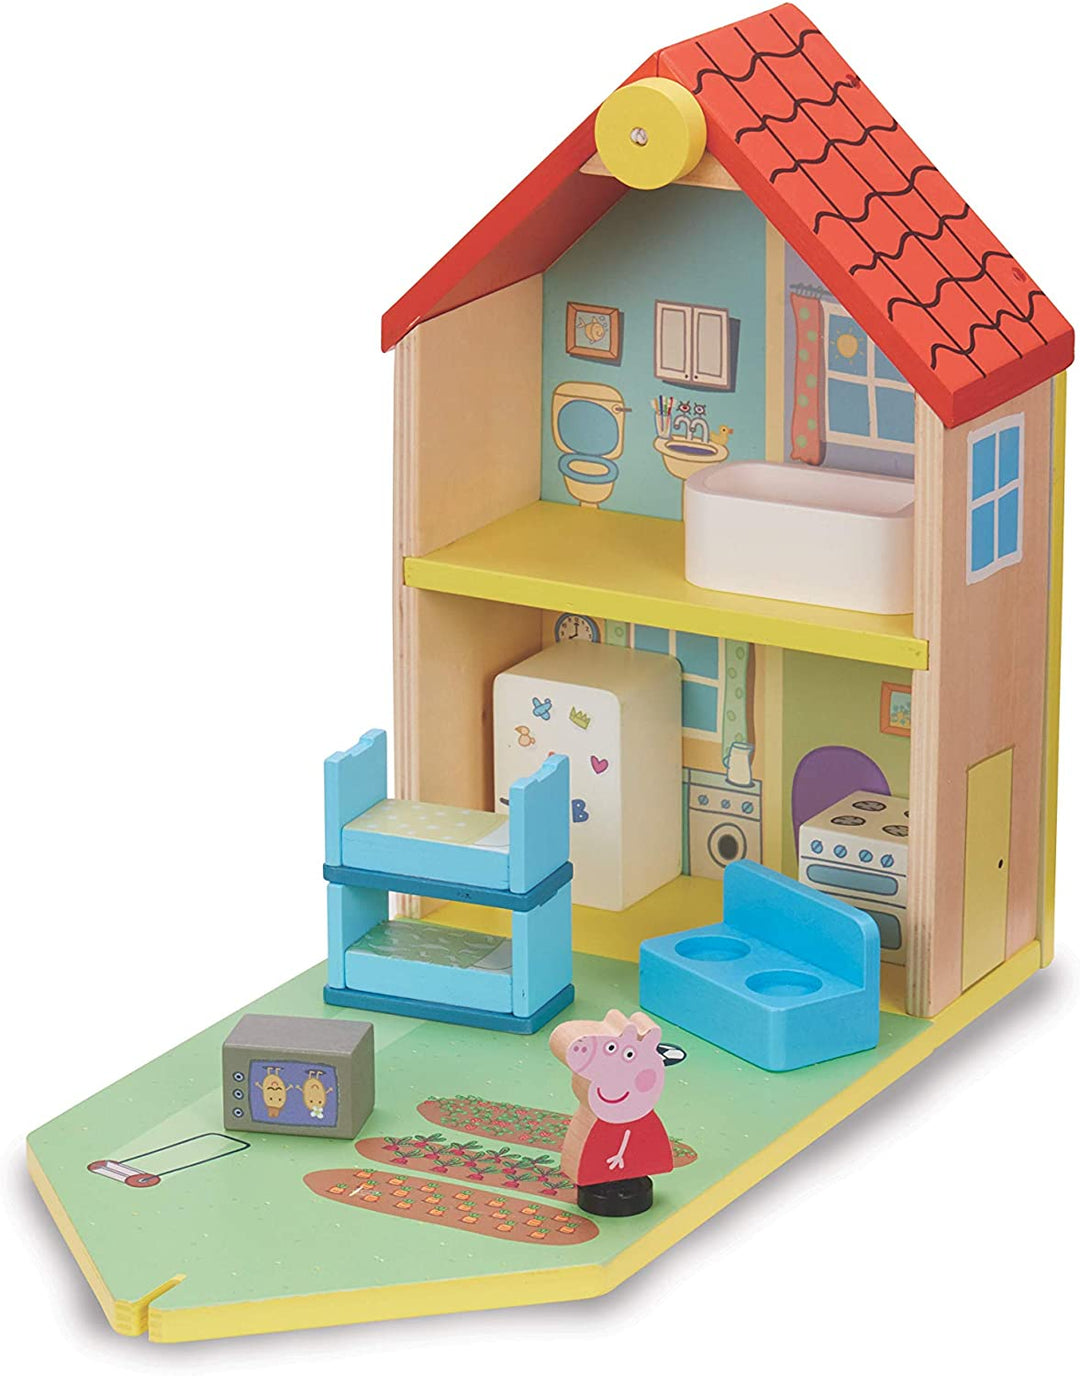 Peppa Pig 07213 Wooden Family Home, Multi Color